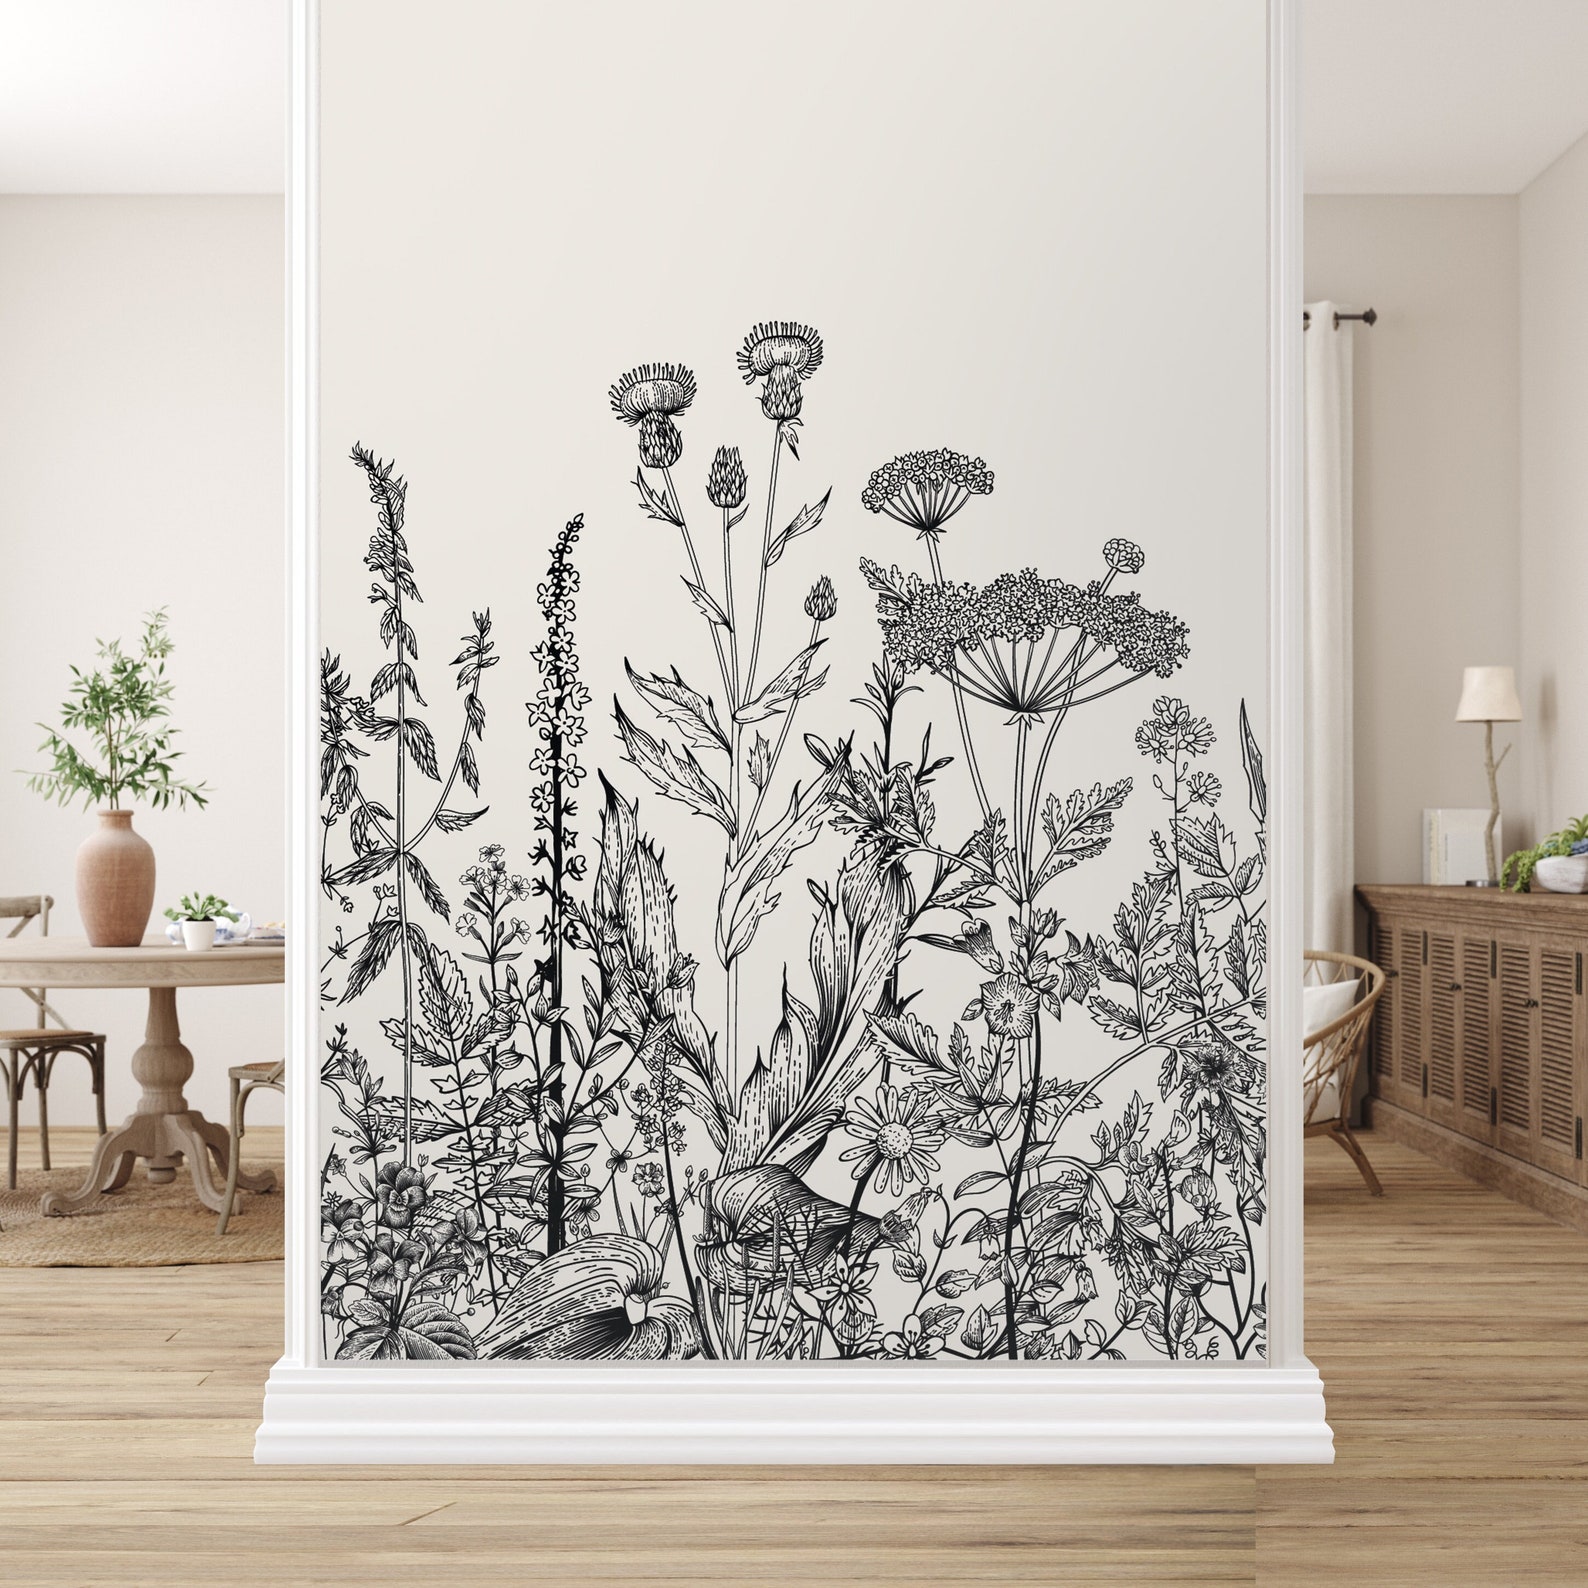 Wildflower Wallpaper Peel and Stick Floral Wallpaper Big - Etsy